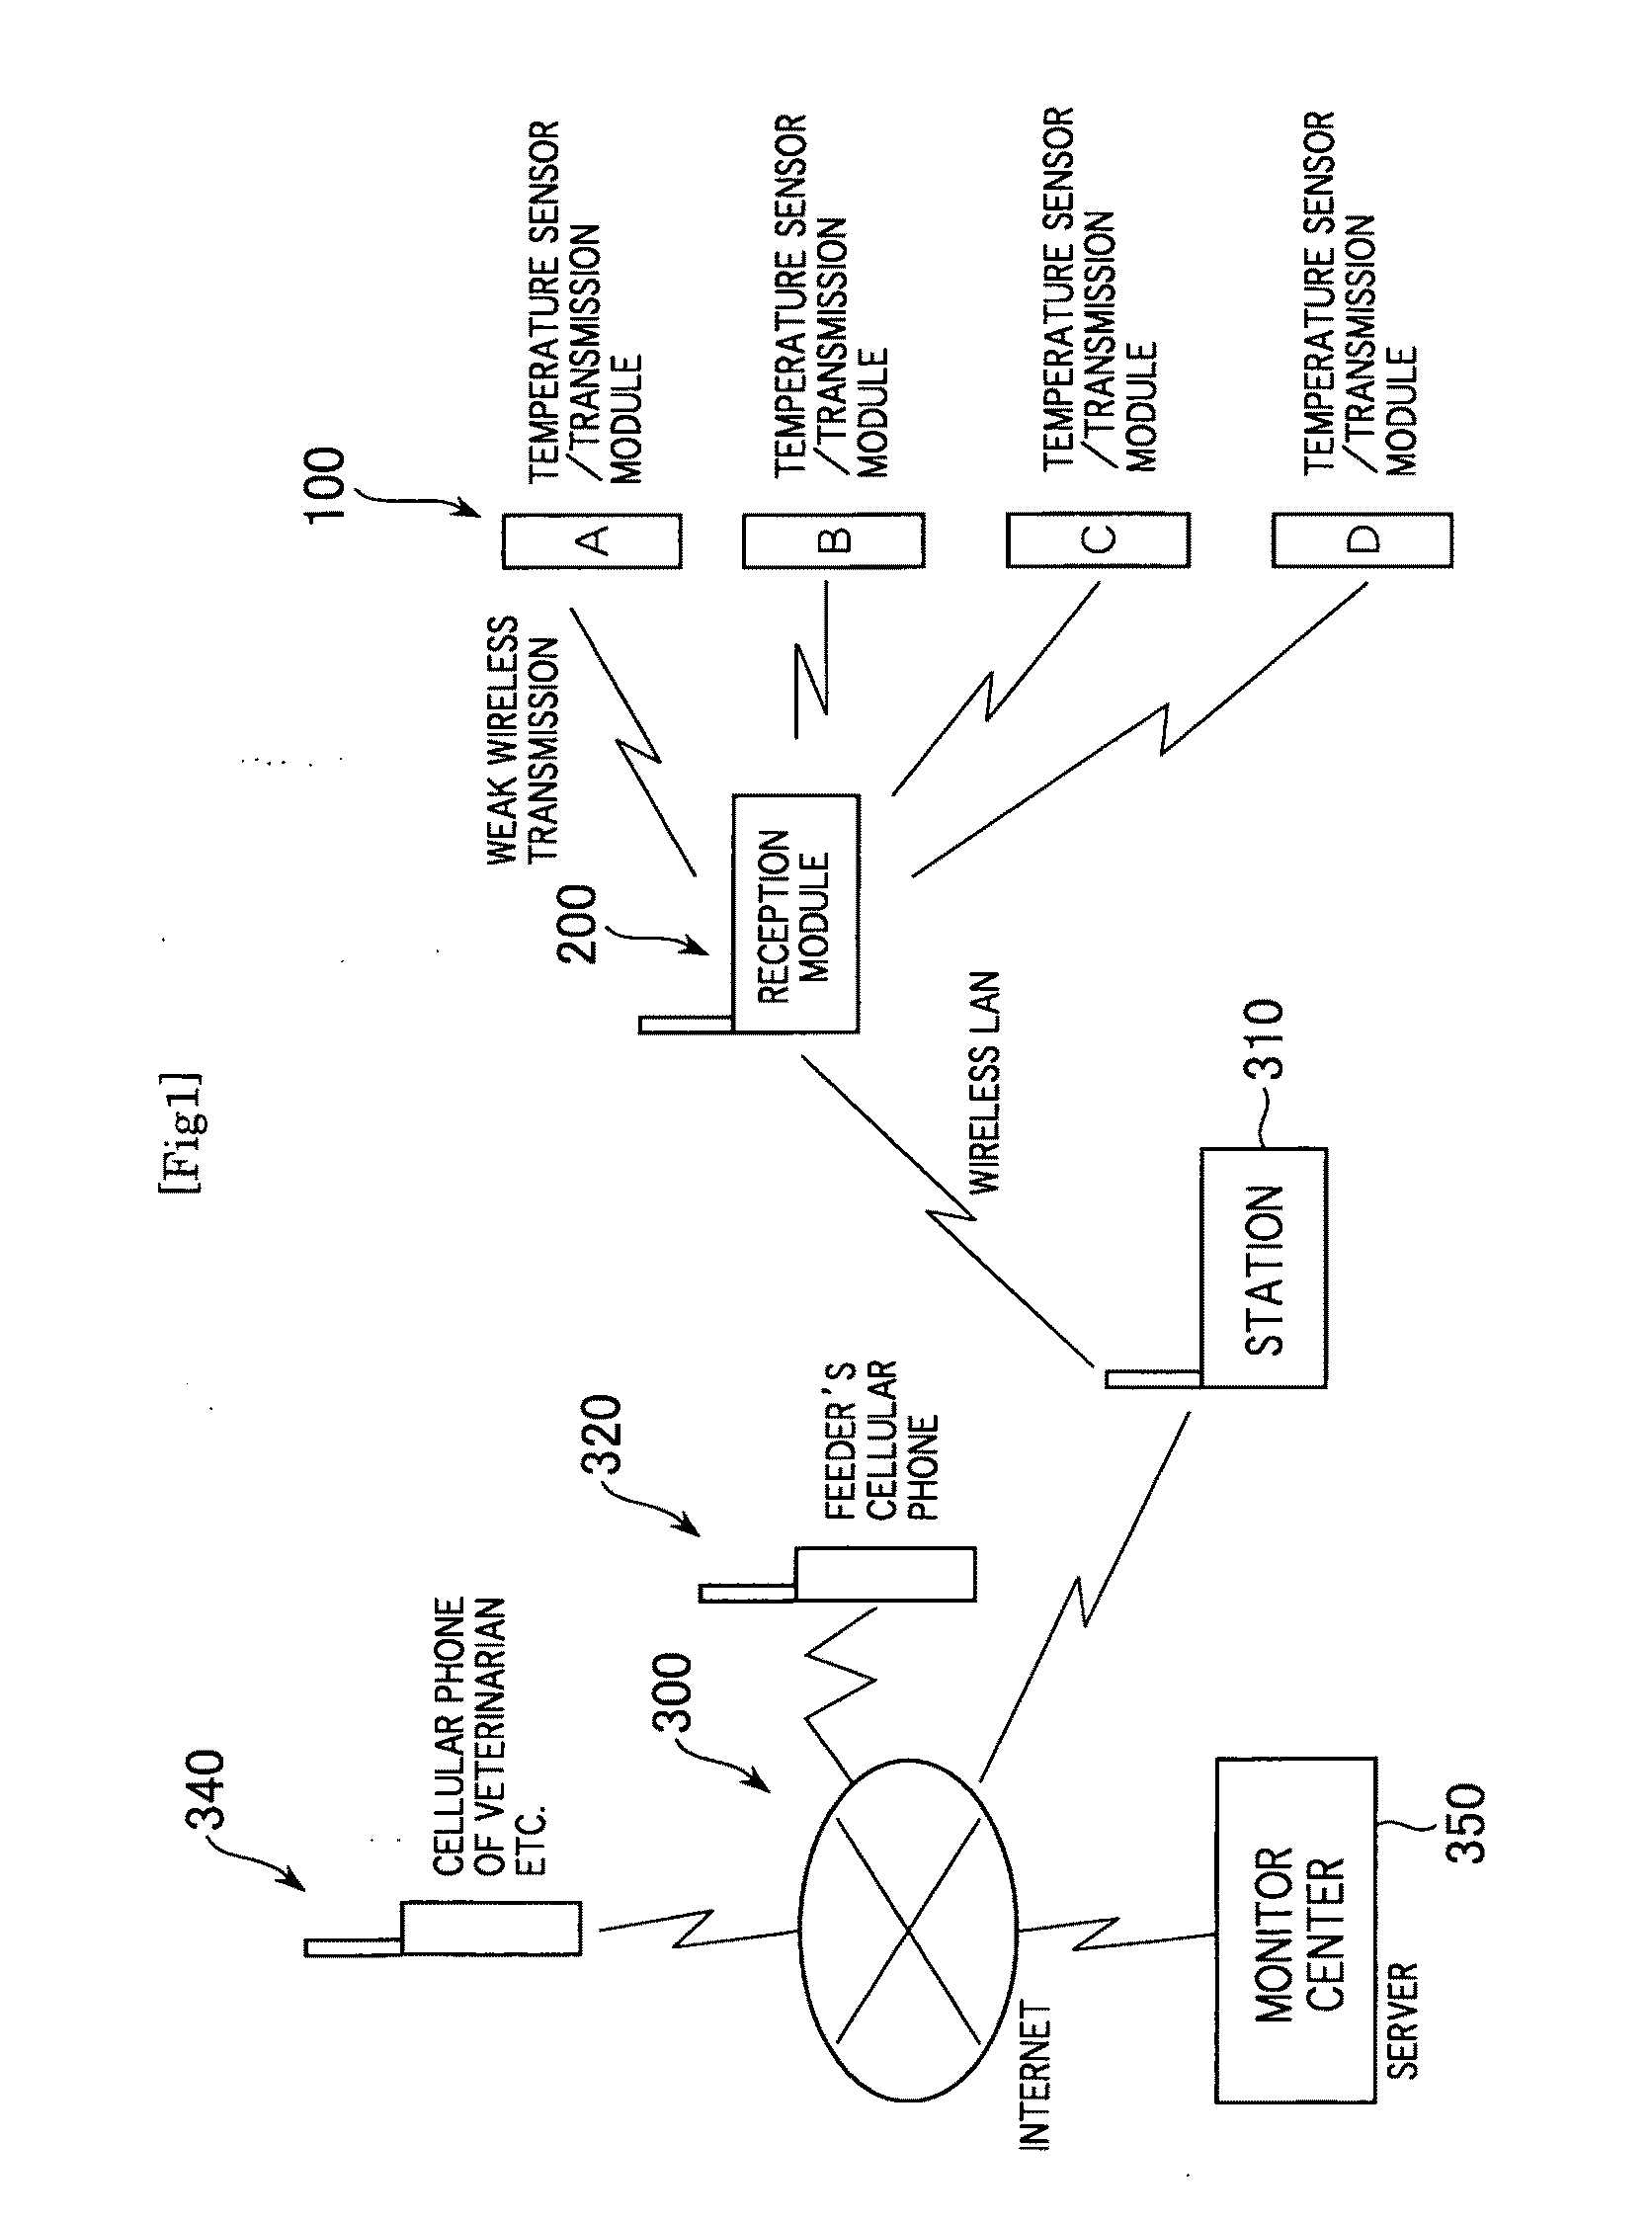 Birth Prediction Reporting System for Live Stock Animals